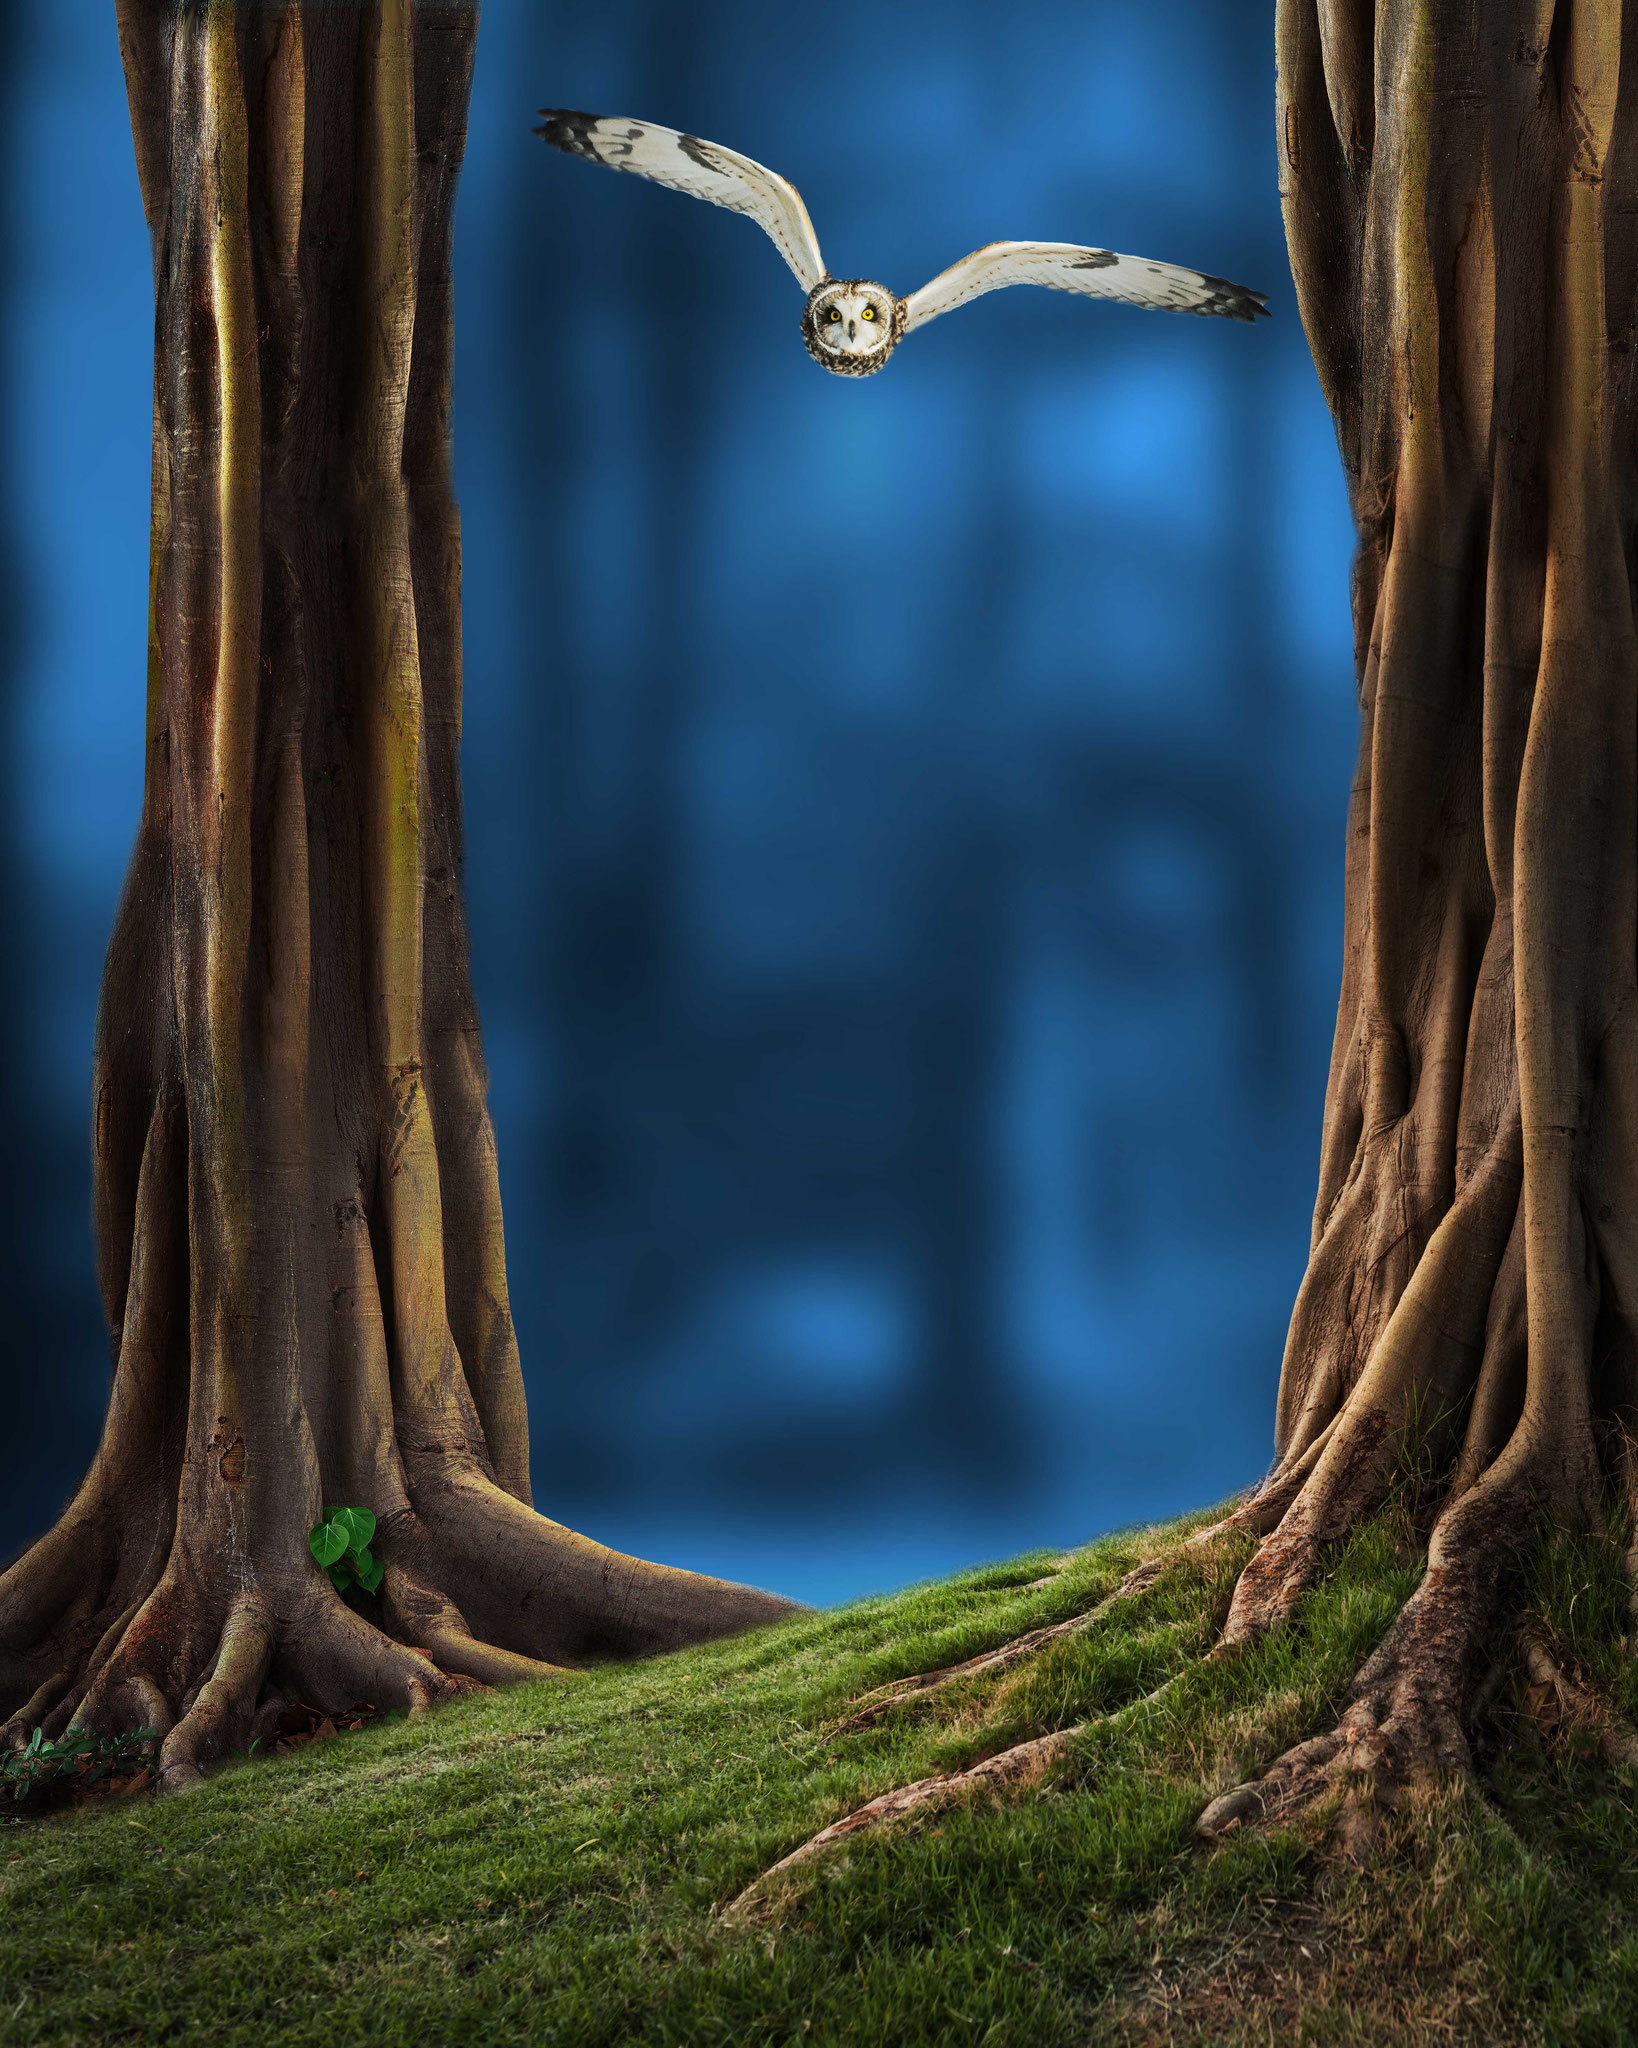 Fantasy; Forrest with Owl